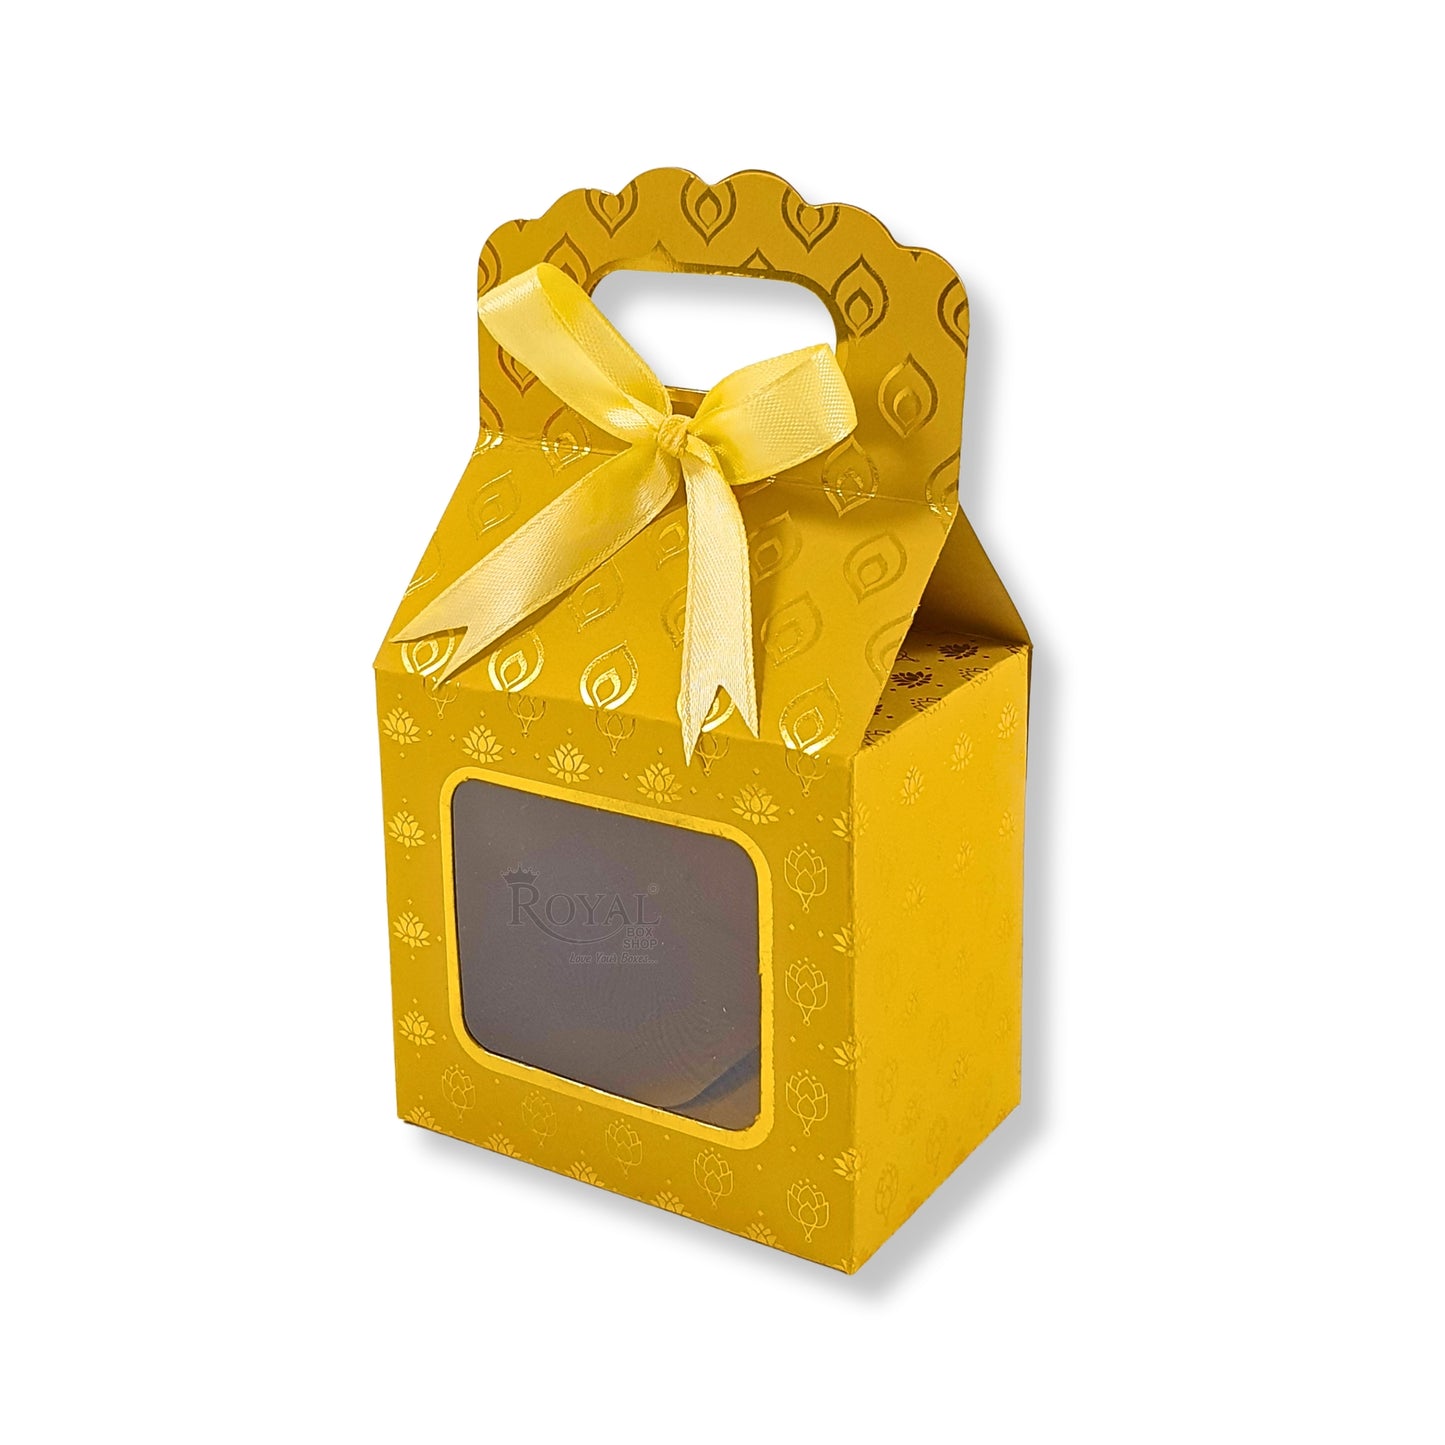 Premium Gift Box with Window I Yellow Flower Leaf Print I 4x2.5x3.5 inches I For Return Favor Gift, Baby Shower Gifts, Room Hampers, Candy Box, Birthday Return Gift